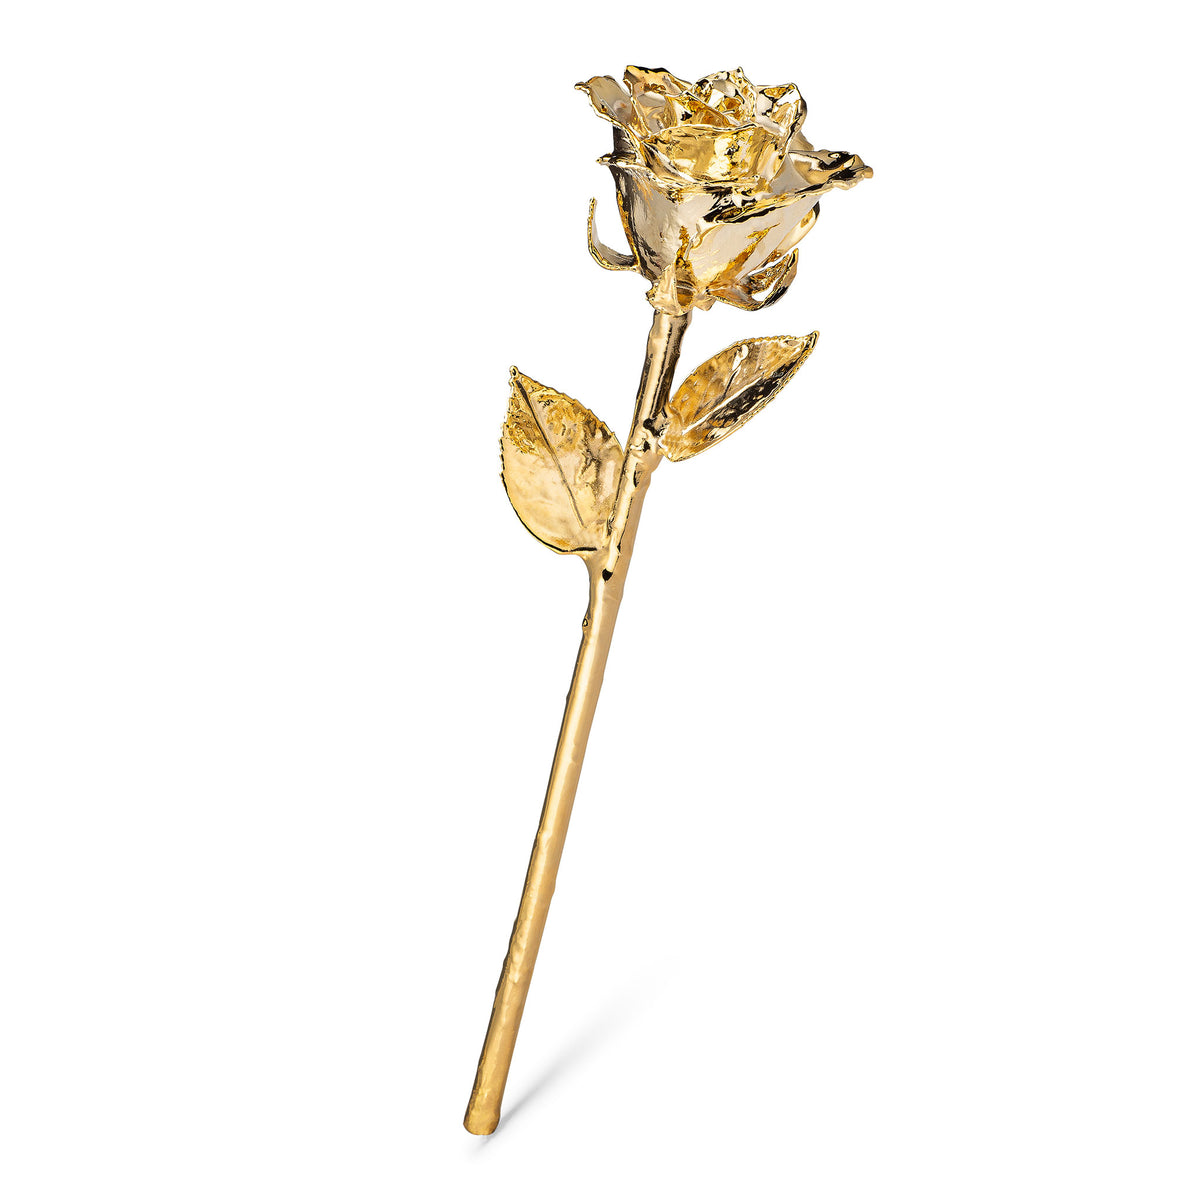 Real 24K Gold Forever Rose. Rose is fully dipped in gold. View shows the rose petals, sepals, stem, and leaves covered in 24 karat gold. The entire stem is shown.